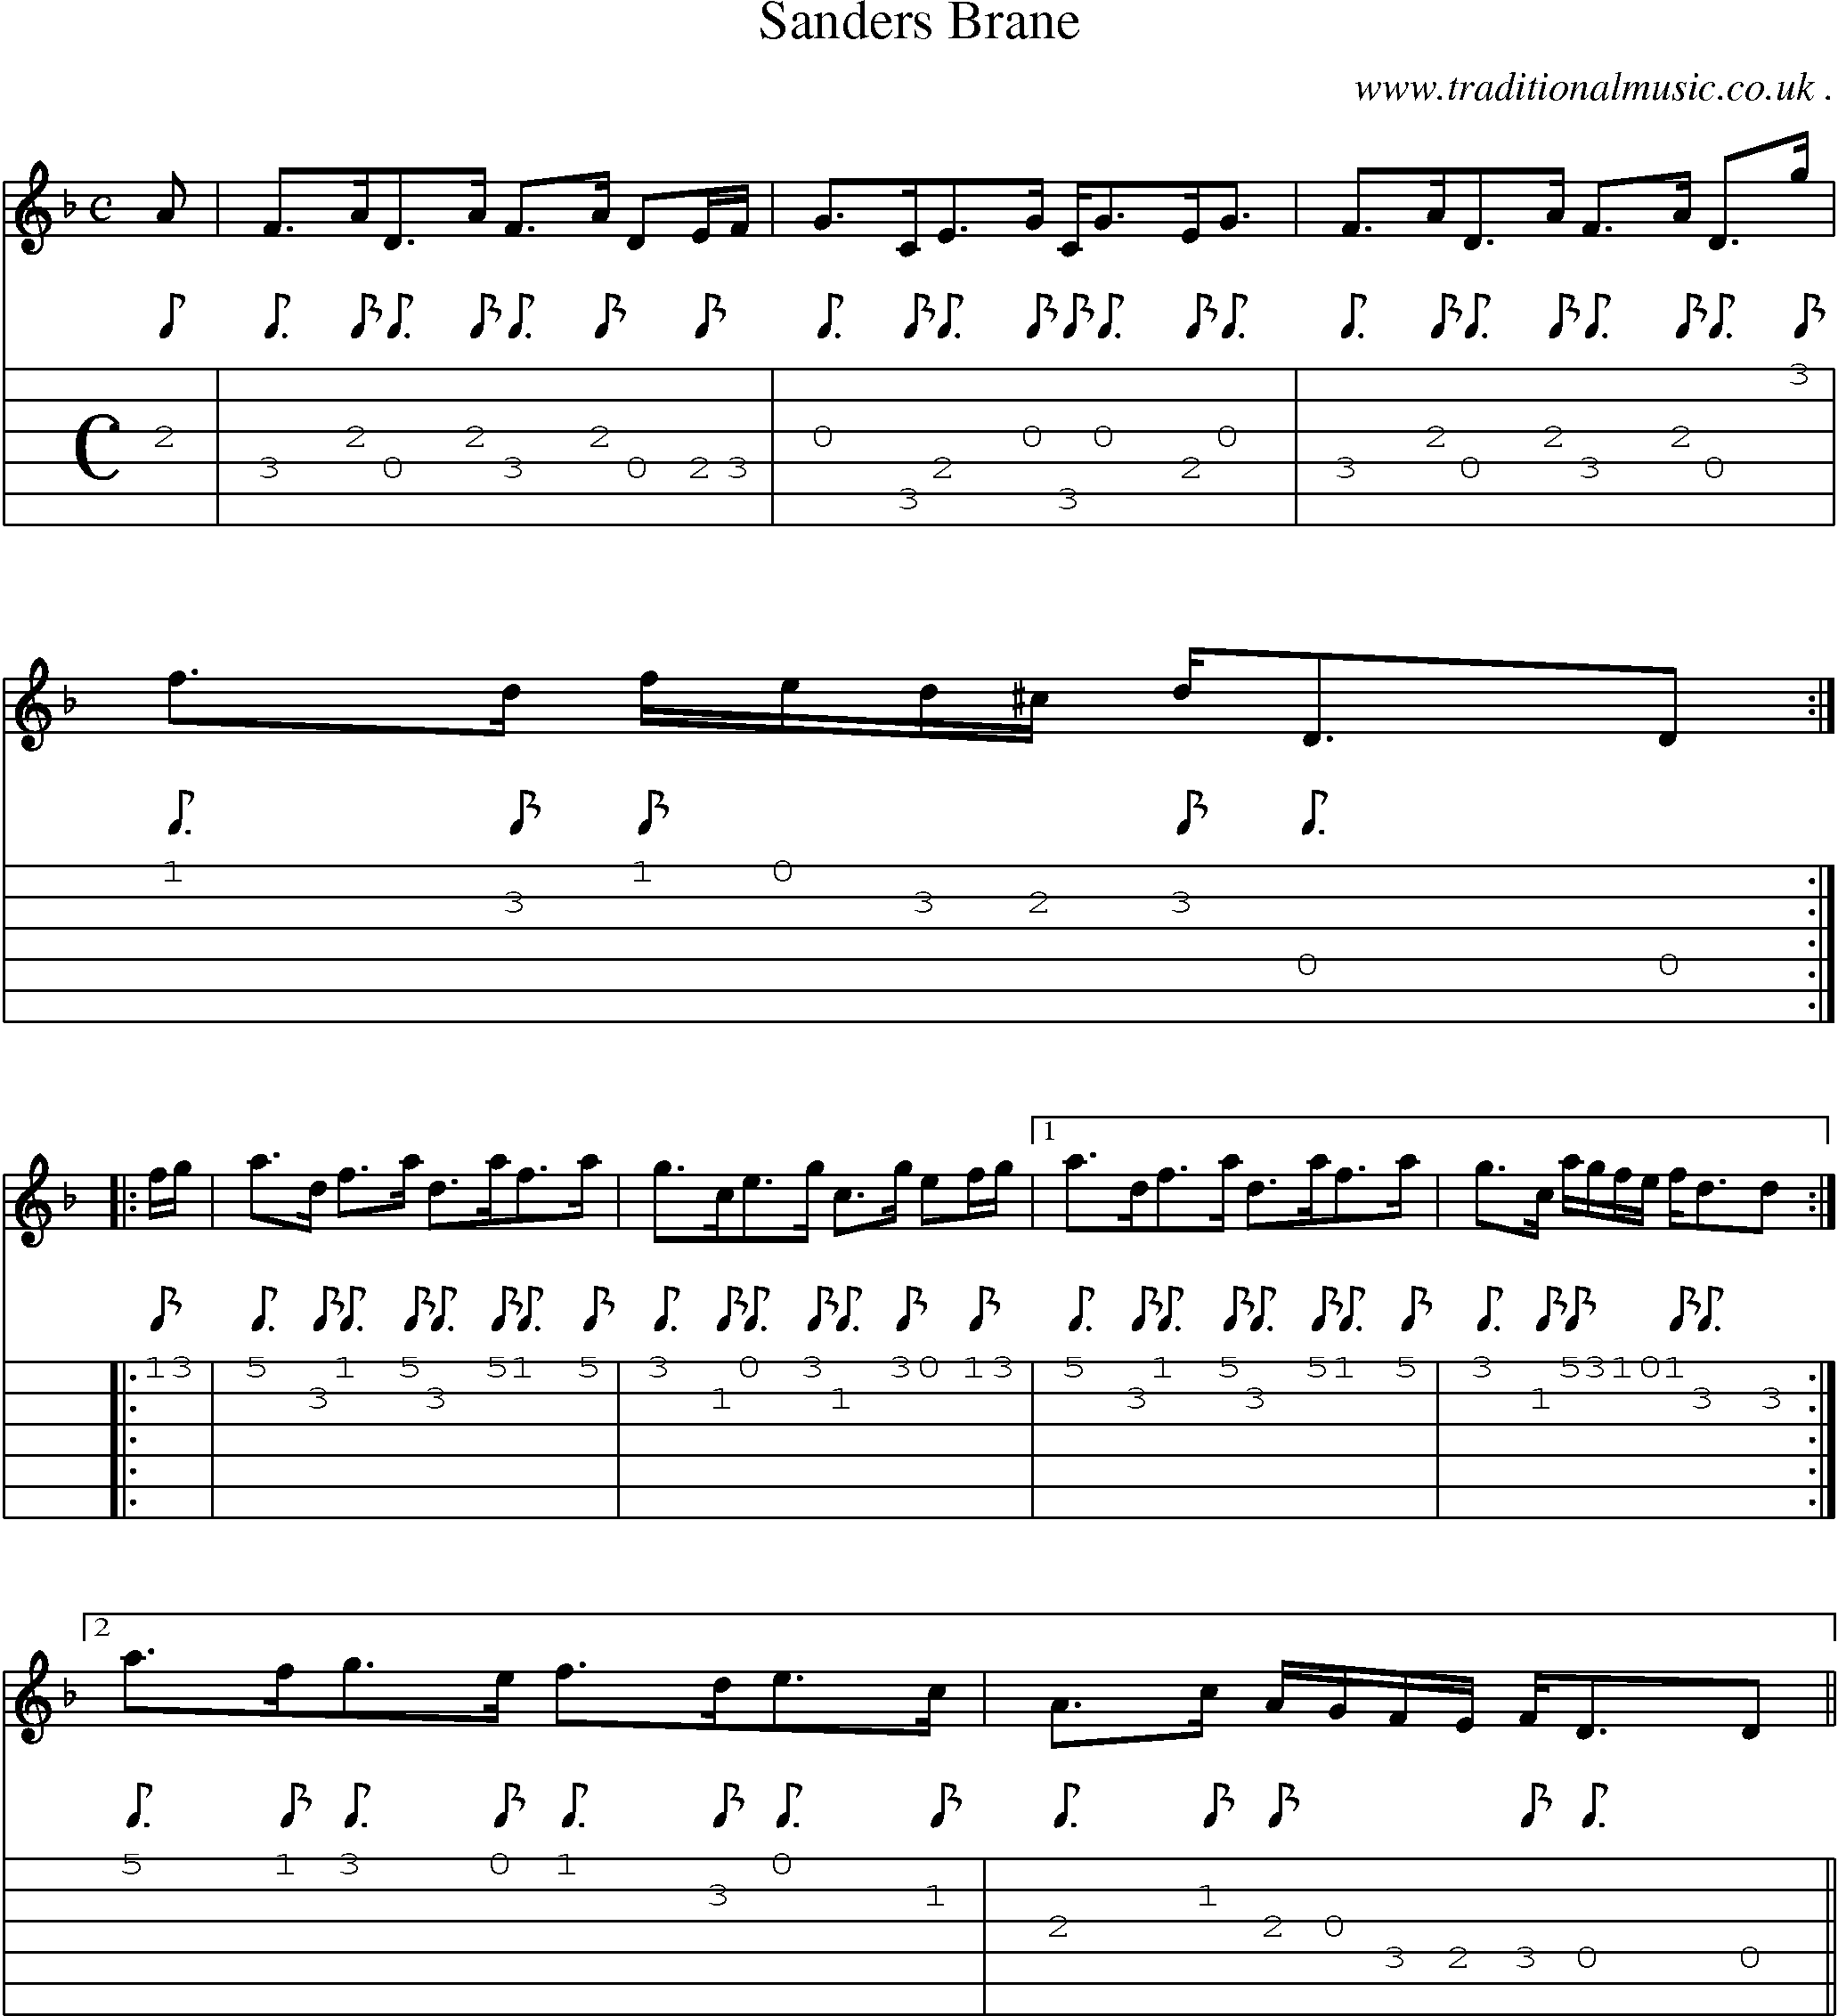 Sheet-music  score, Chords and Guitar Tabs for Sanders Brane